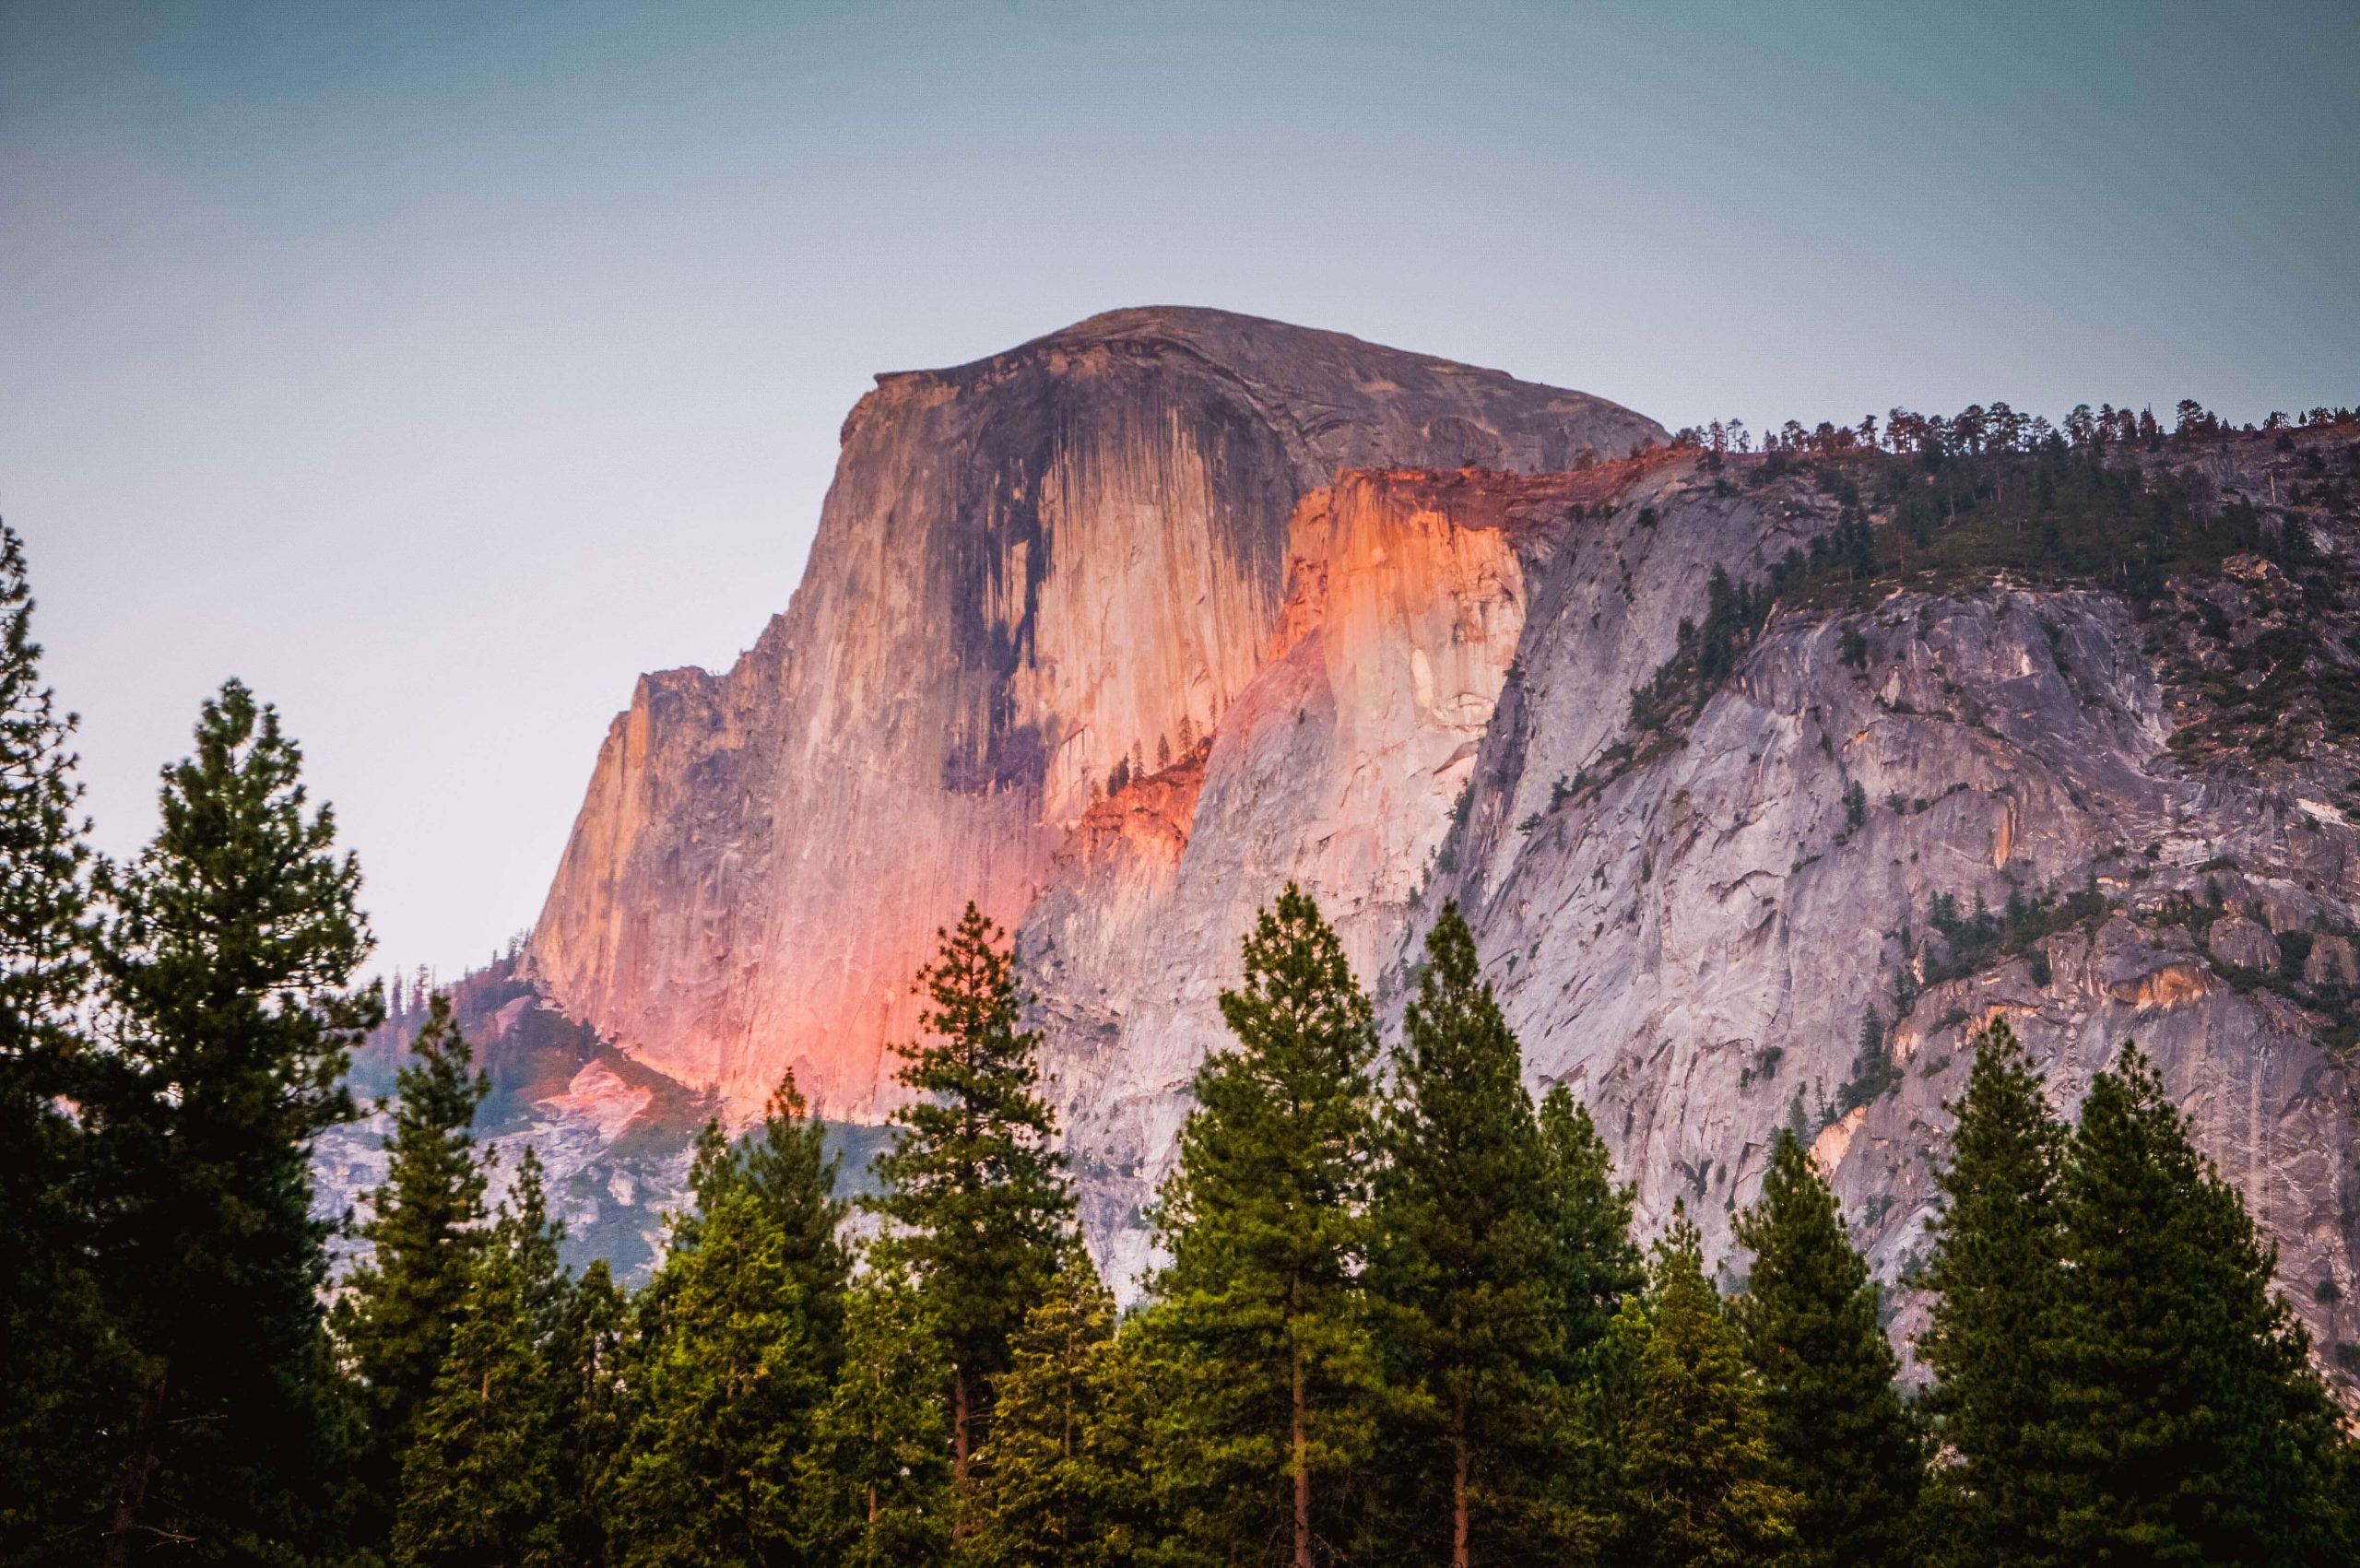 Is there a fee to enter Yosemite National Park?